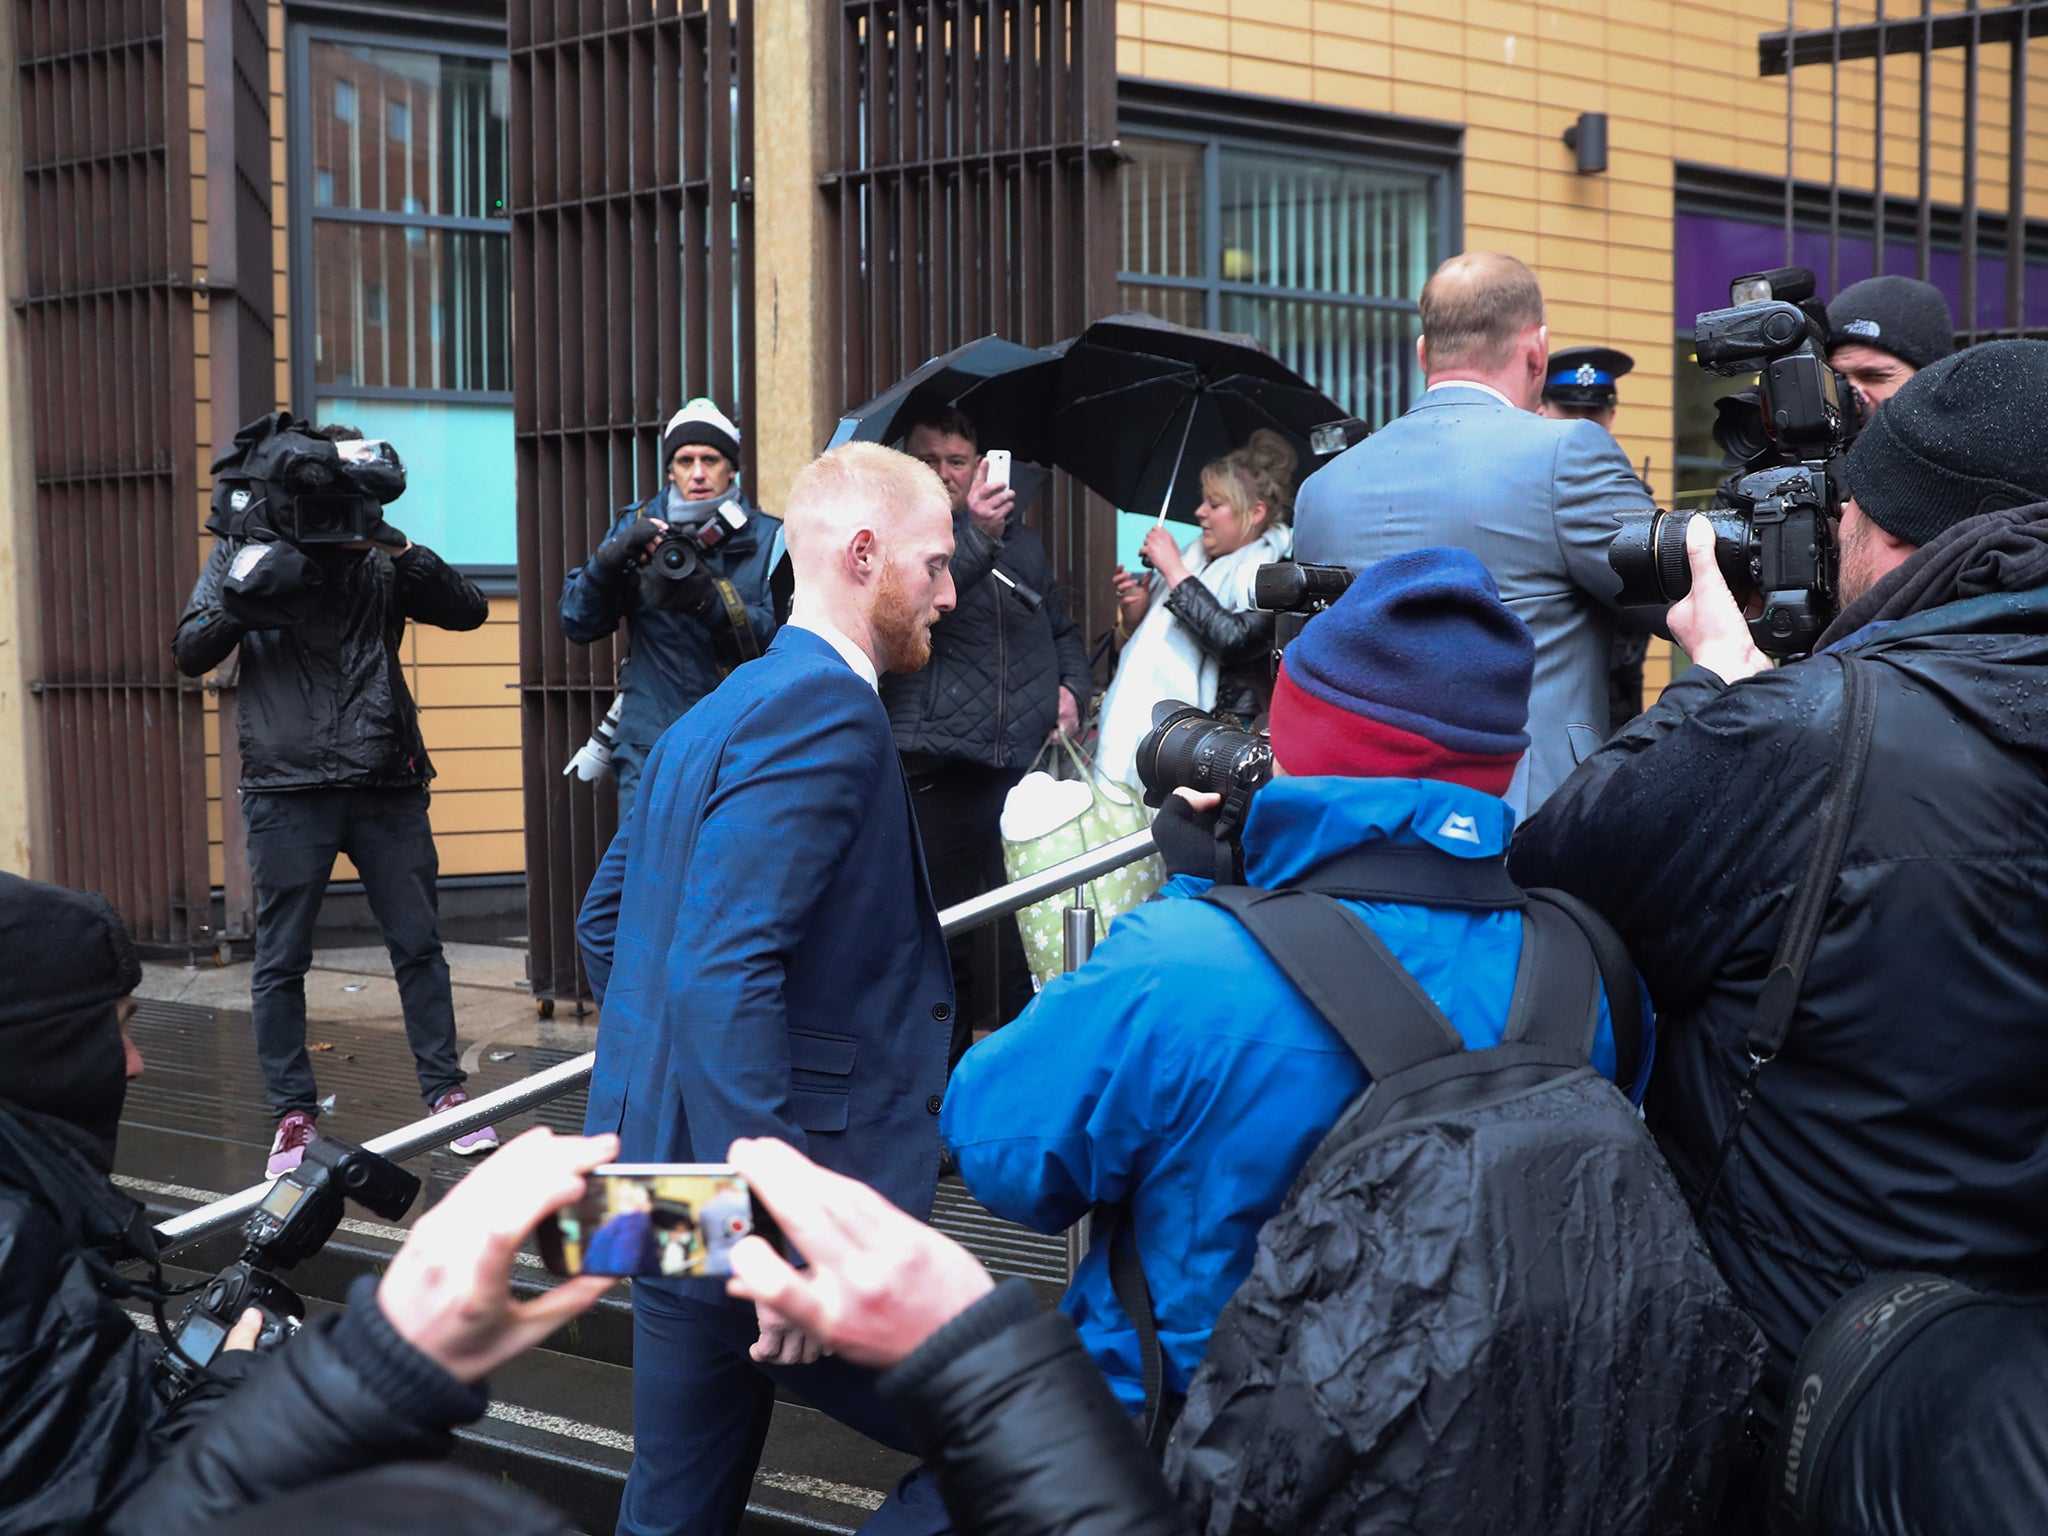 Stokes will not be needed to attend the first hearing on 12 March at Bristol Crown Court